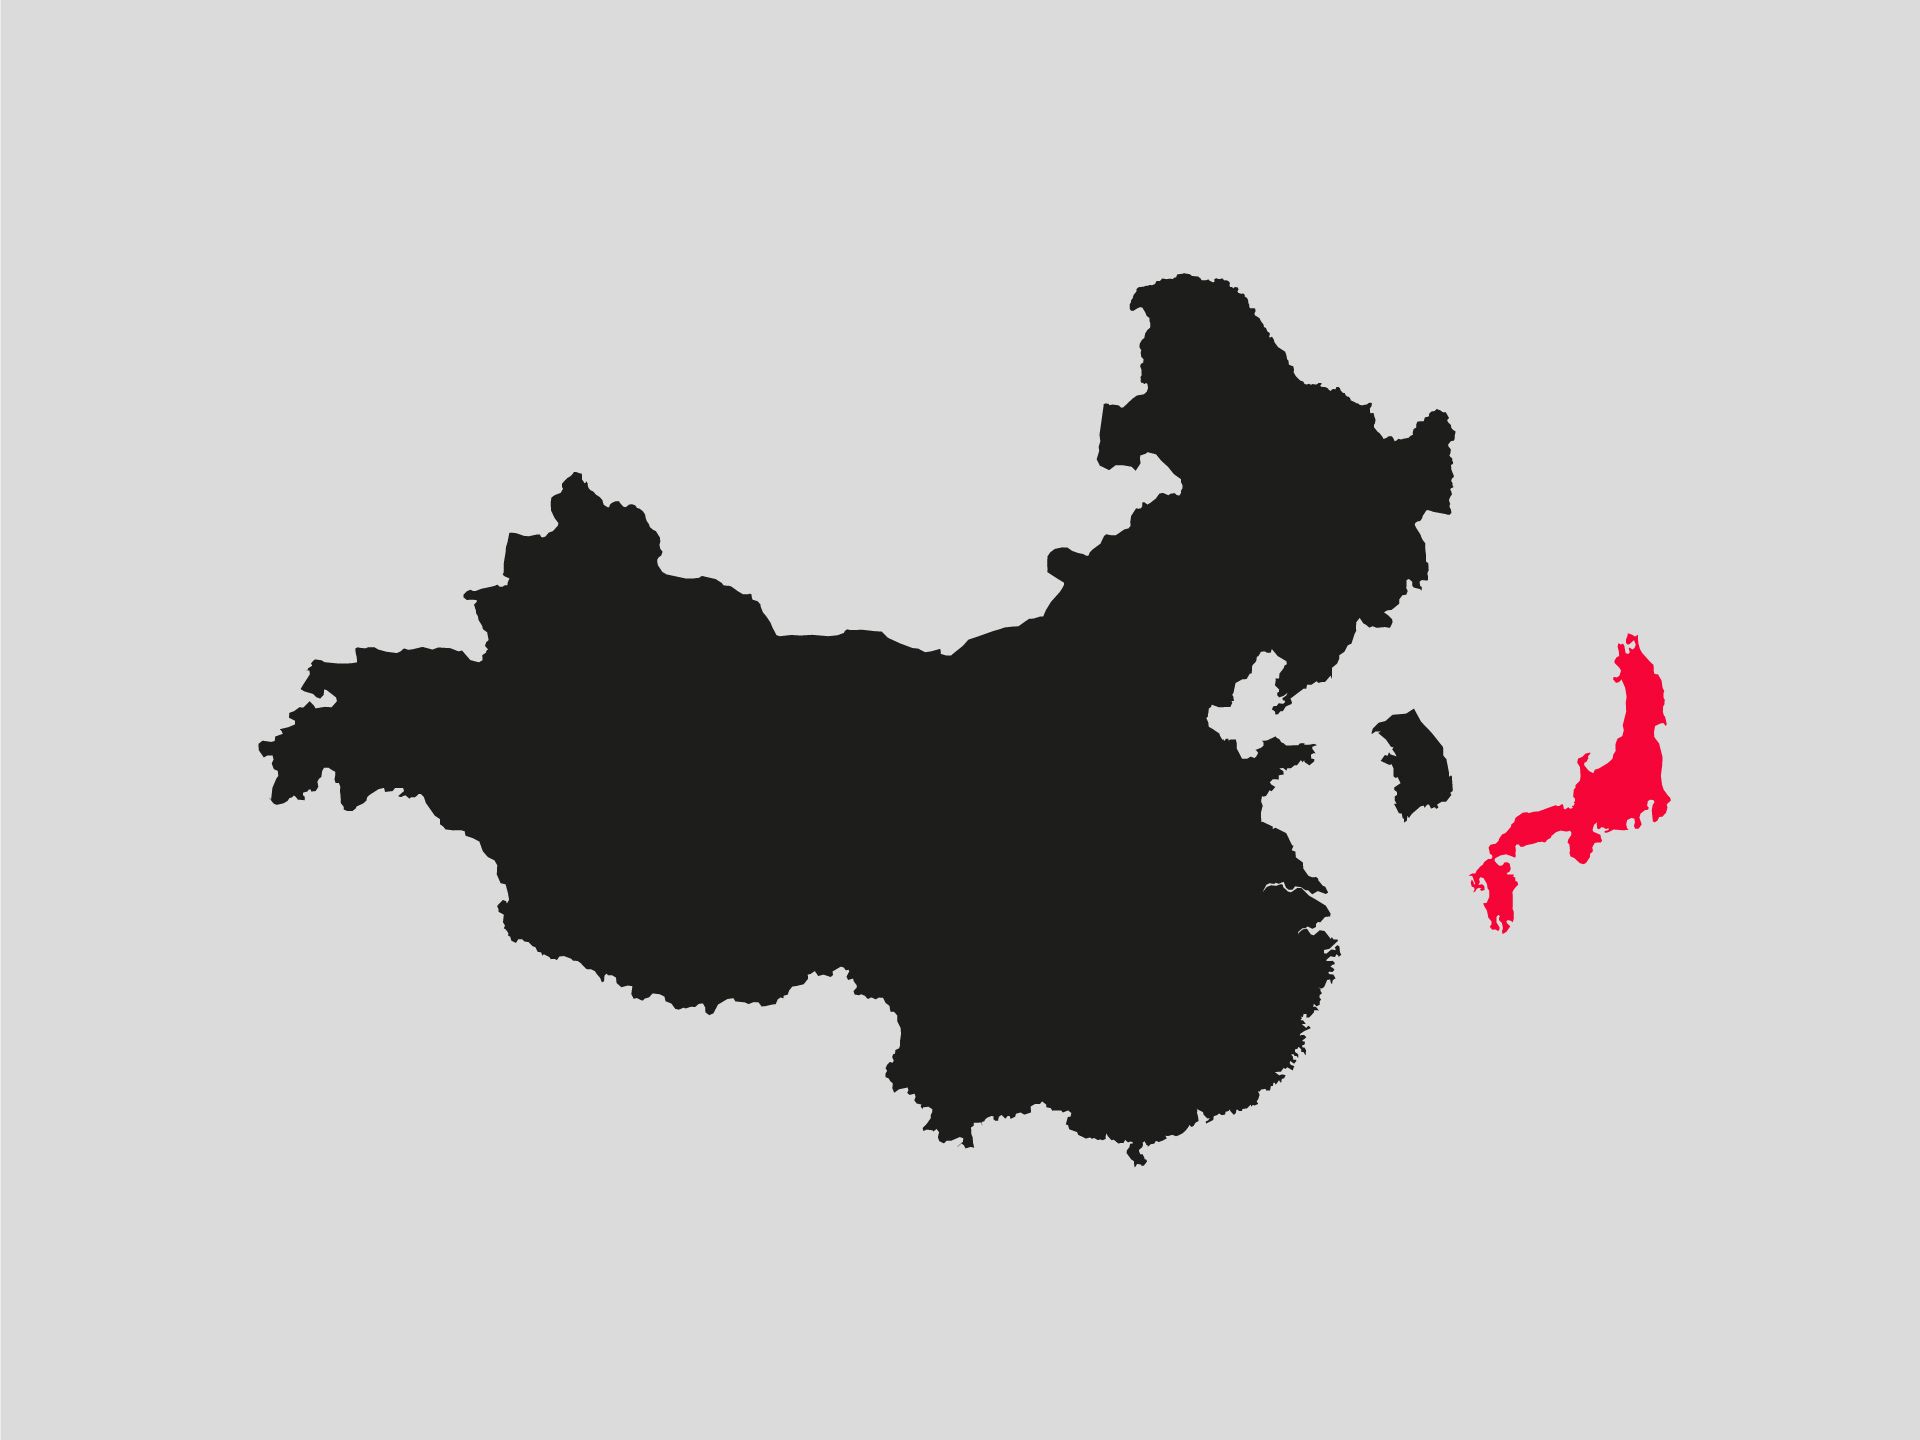 This graphic shows China, South Korea and Japan. Japan is highlighted in color.